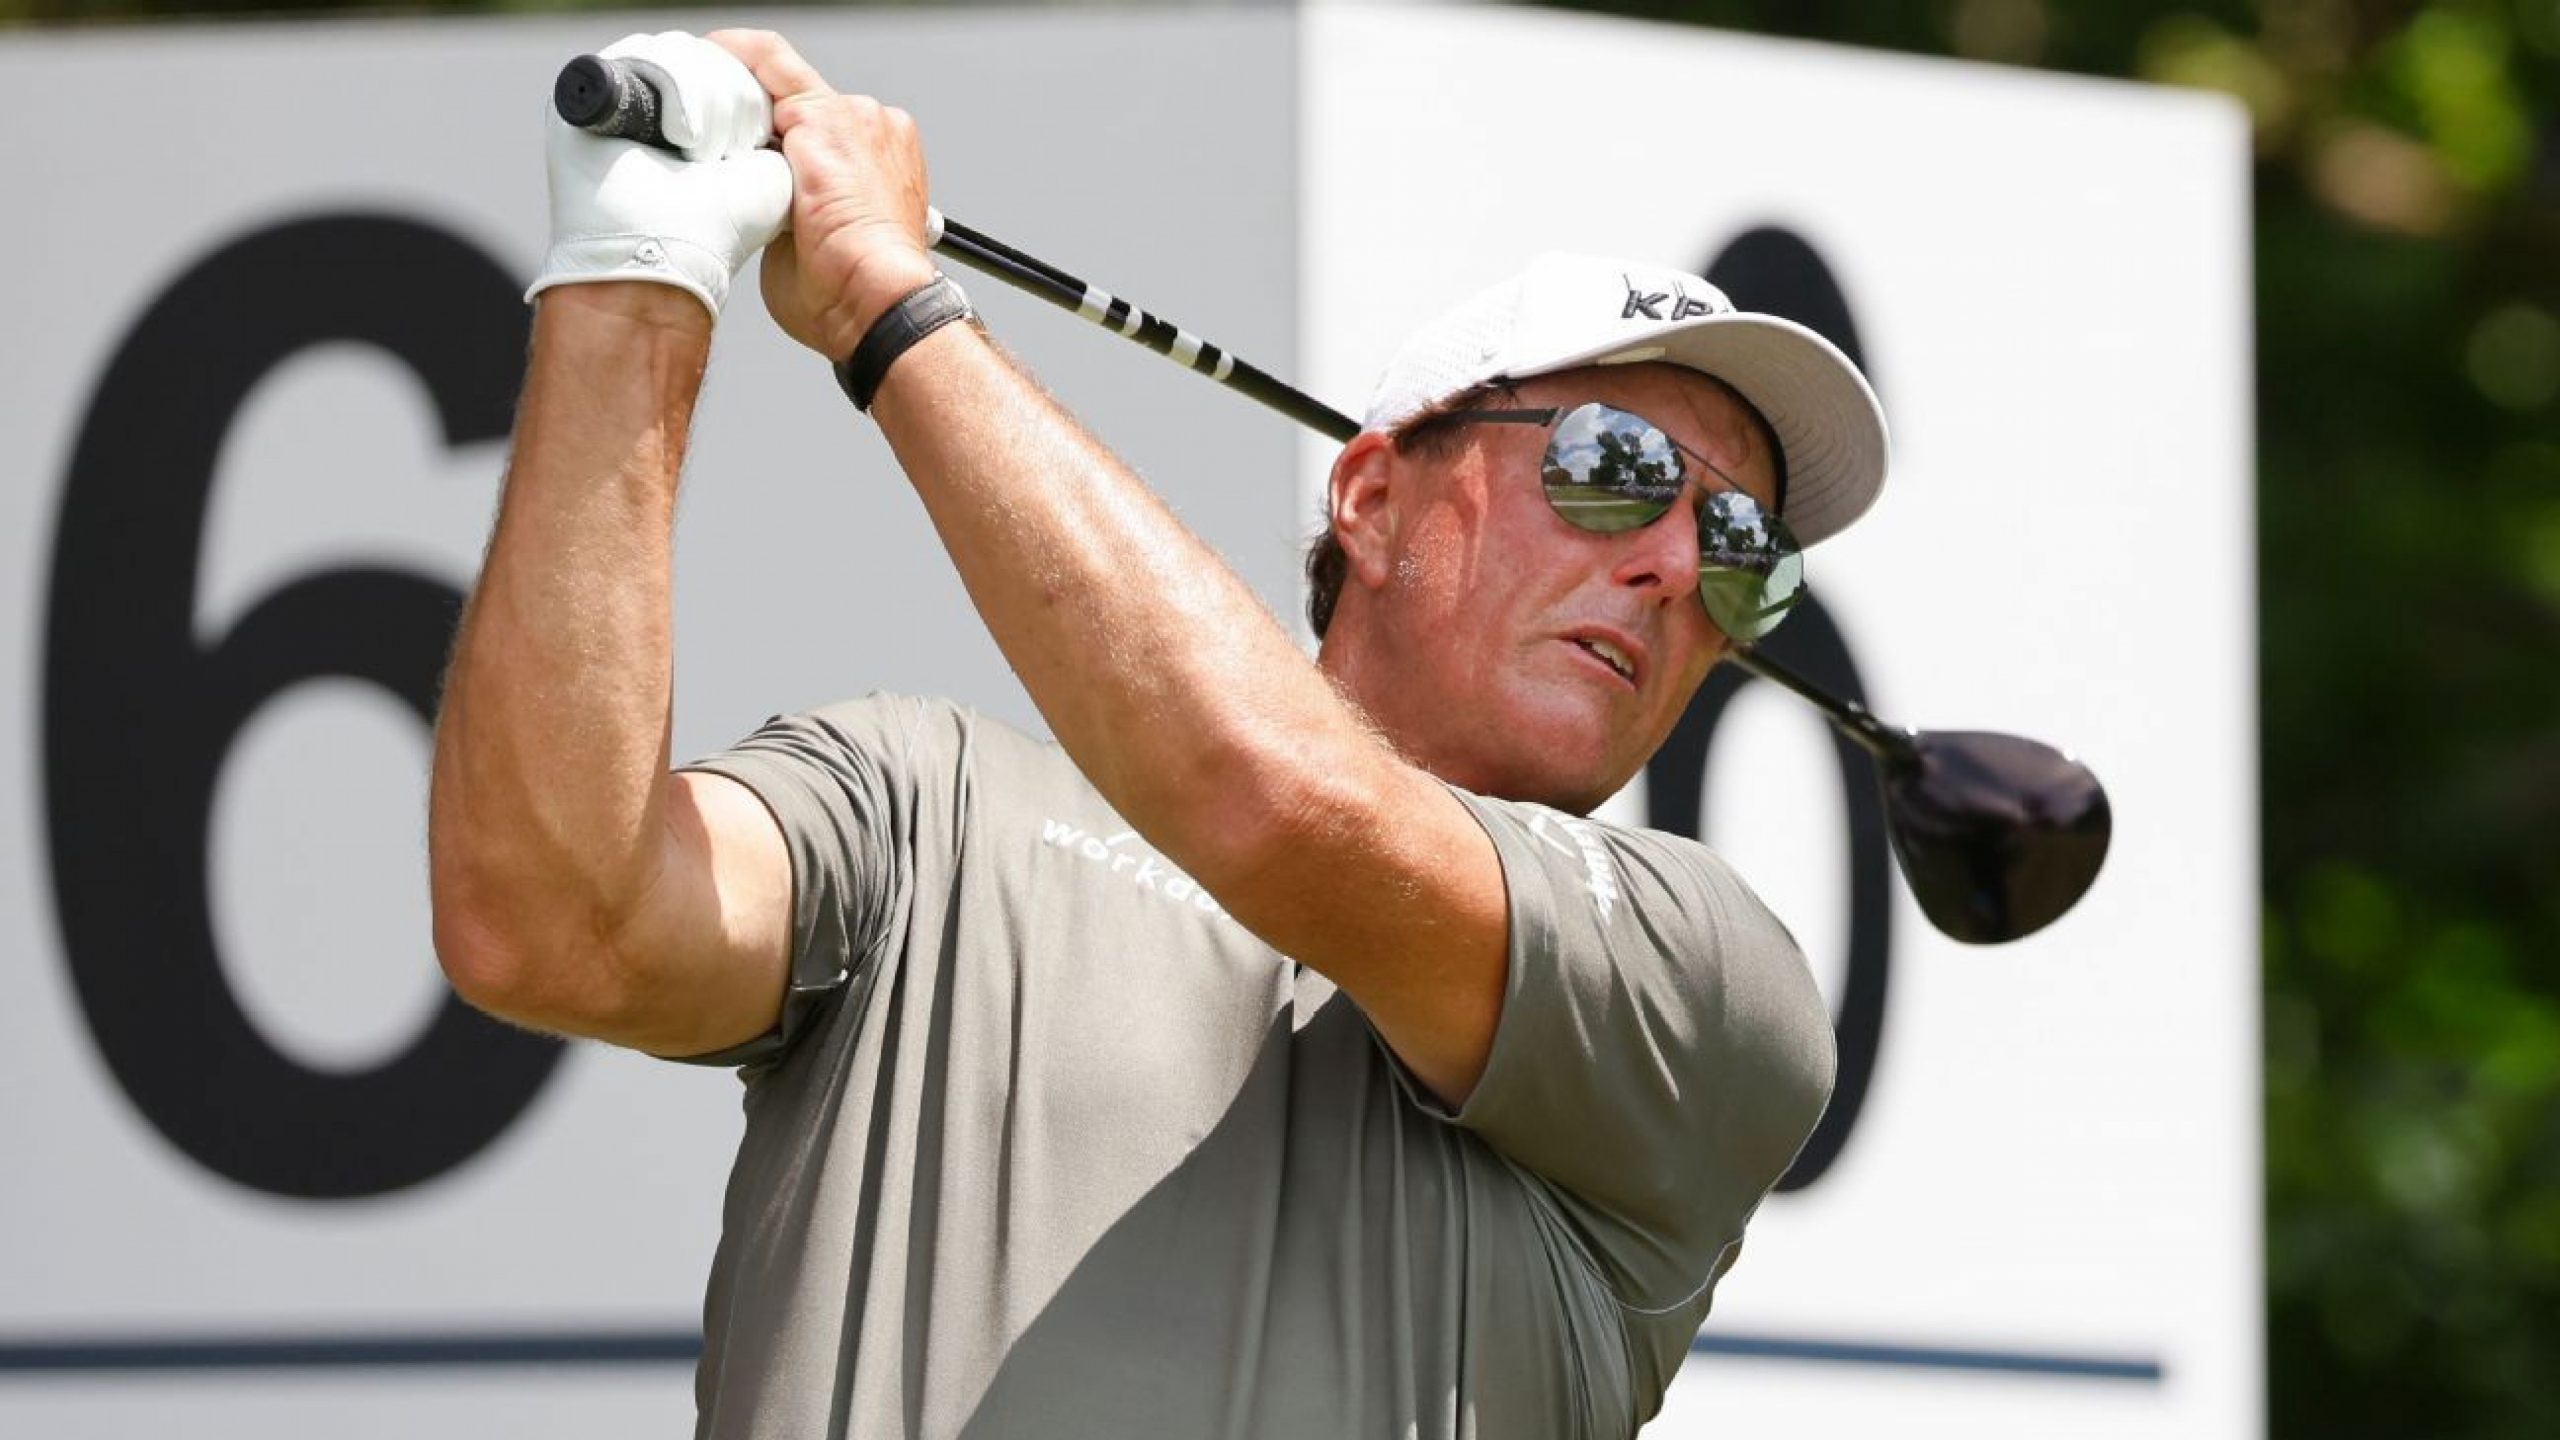 Mickelson shuts out noise in prep for U.S. Open